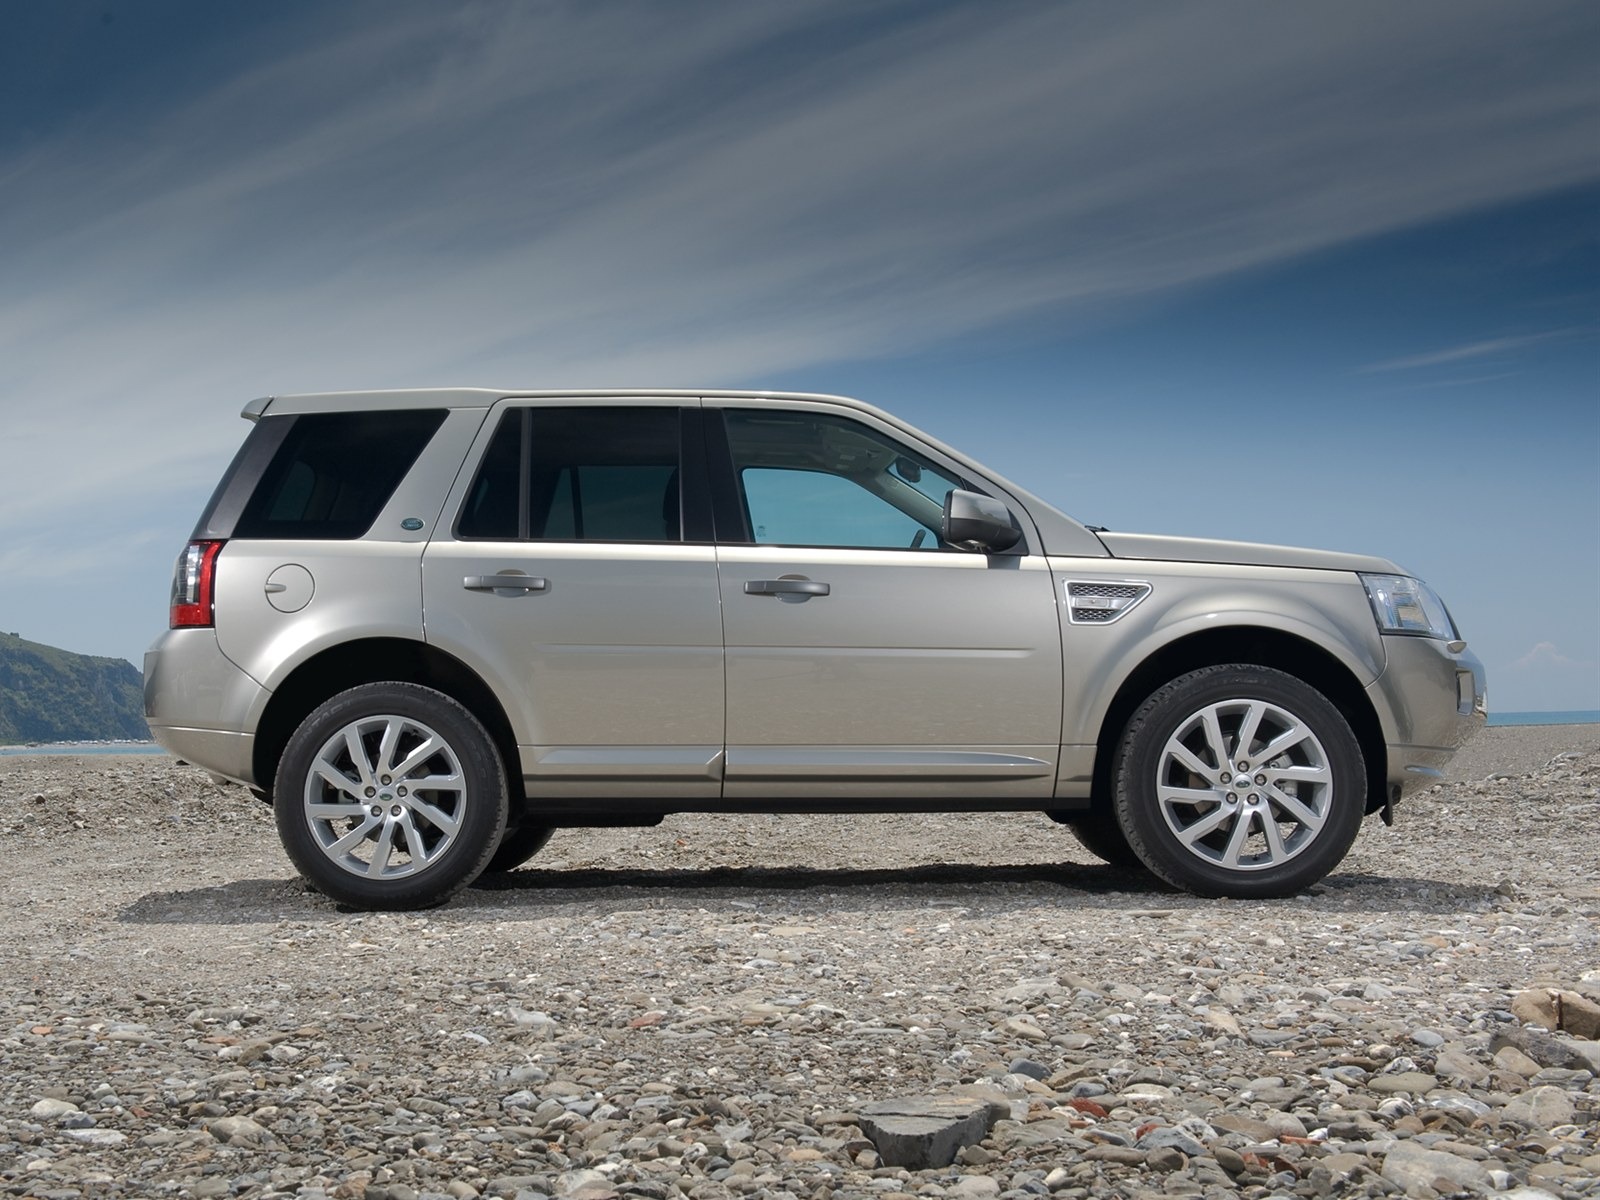 Land Rover wallpapers 2011 (1) #8 - 1600x1200